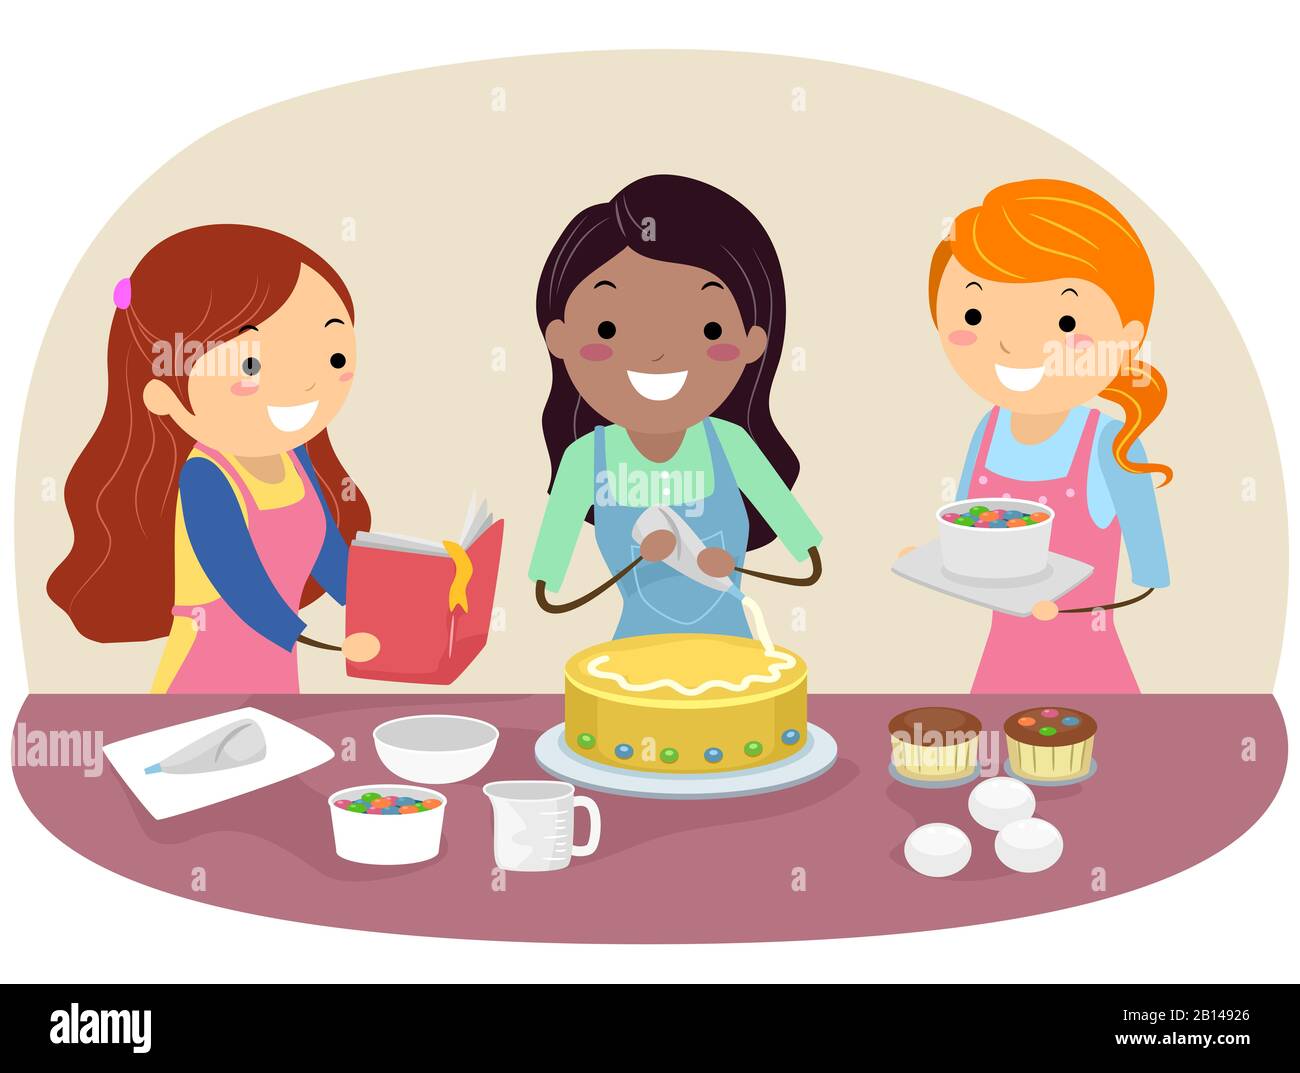 The Girl Bakes And Decorates The Cake With Cream Using A Cooking Syringe  Stock Illustration - Download Image Now - iStock